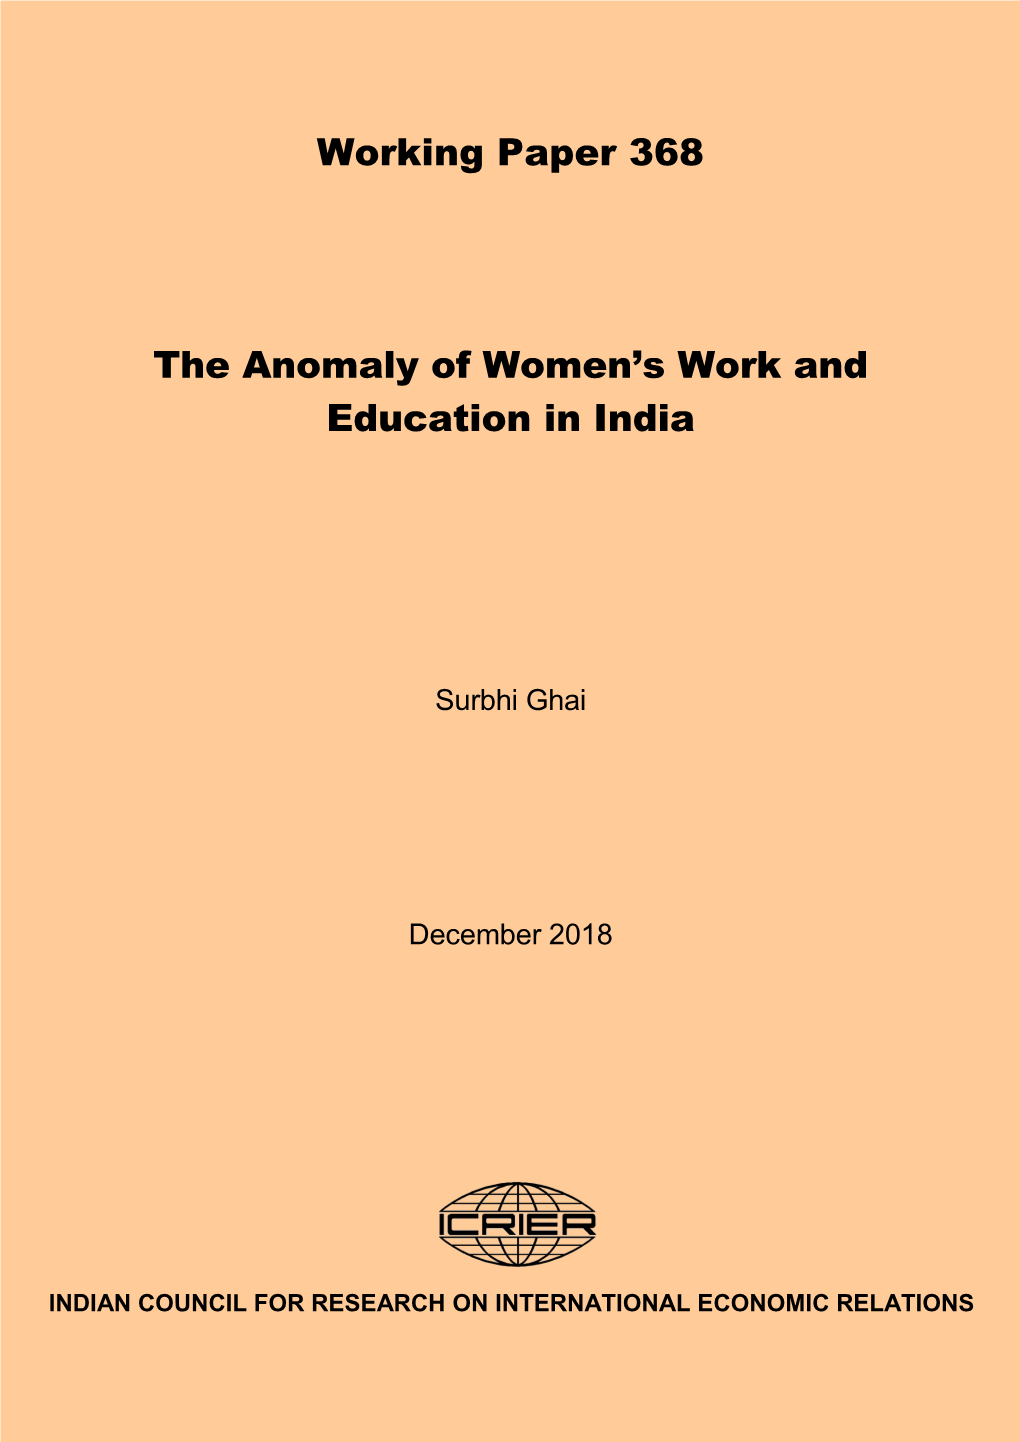 Working Paper 368 the Anomaly of Women's Work and Education in India